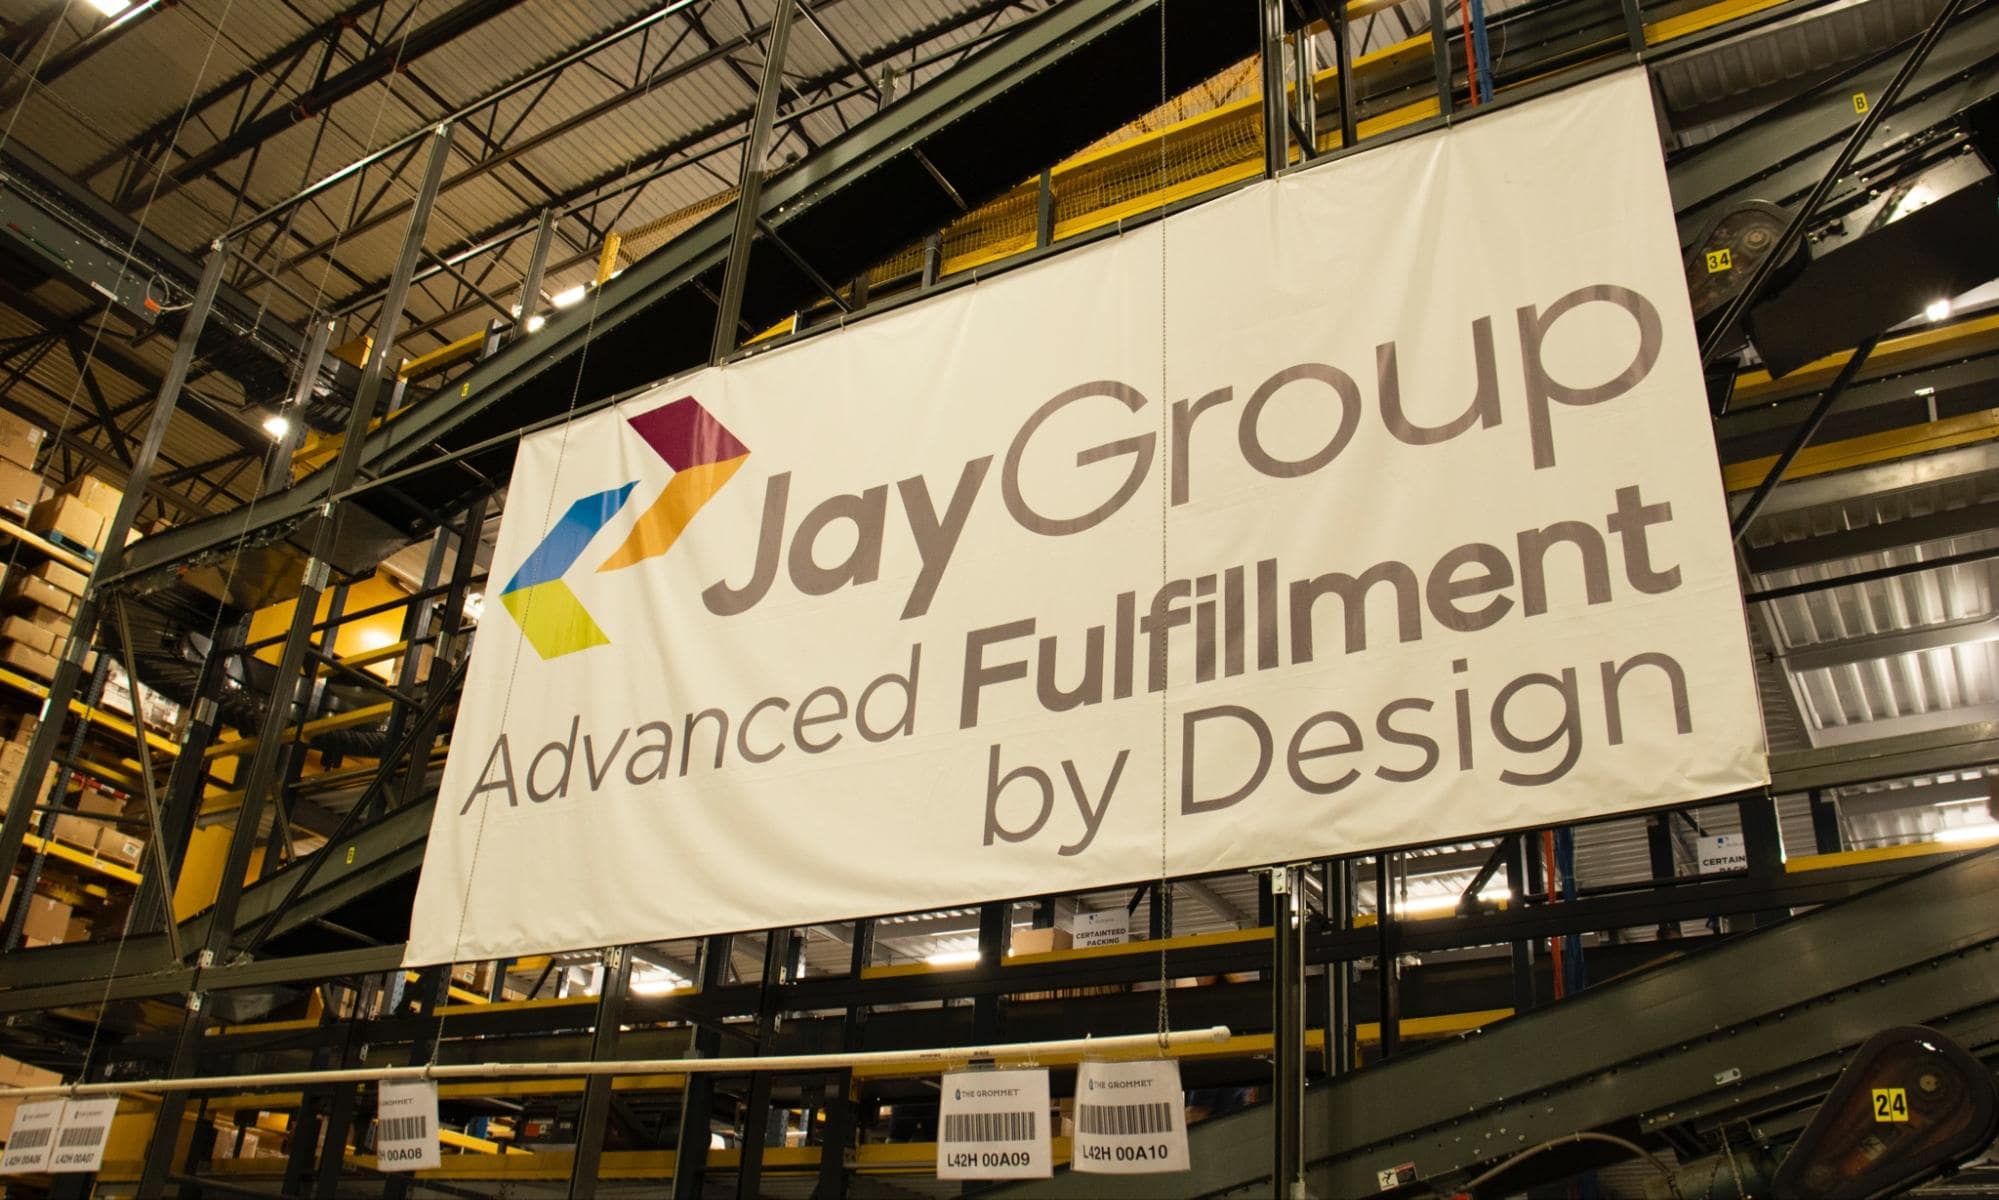 A sign displaying Jay Group Fulfillment by Design. Jay Group is a perfect 3PL Shopify Integration fulfillment partner.